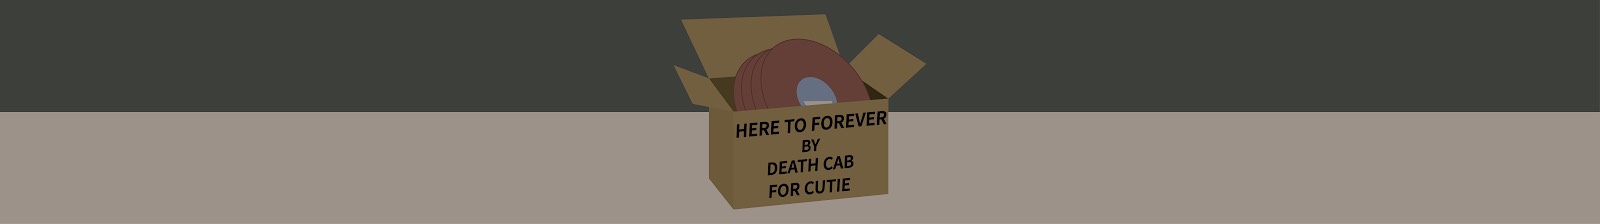 Pick of the Week: Death Cab for Cutie "Here to Forever"